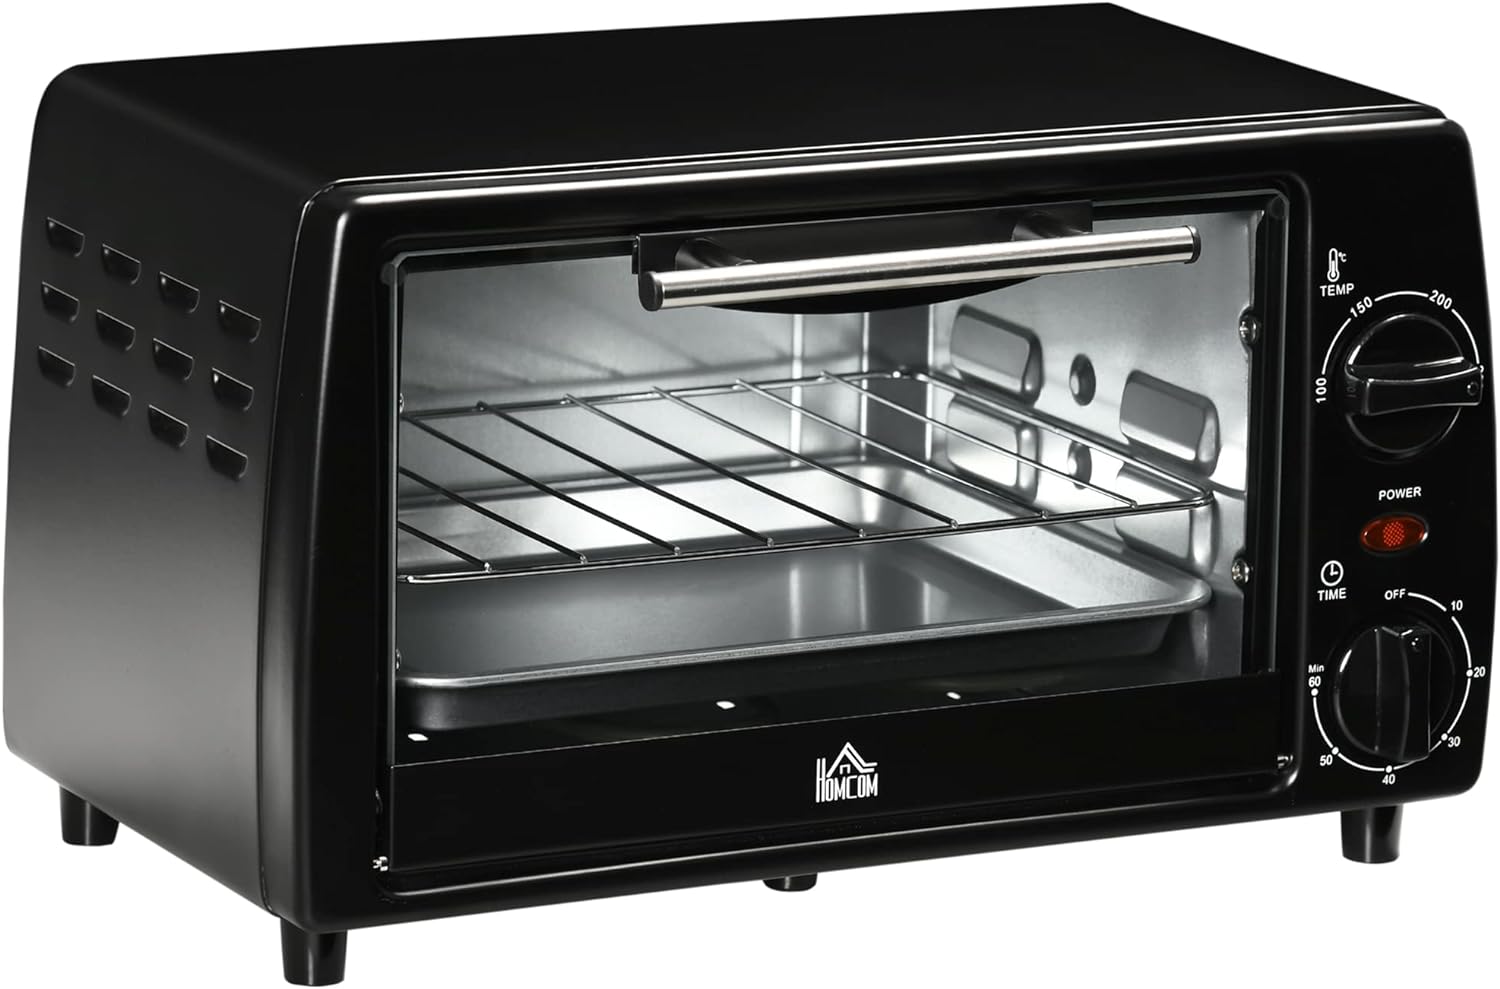 HOMCOM Mini Oven 10 Liters 750 W Small Electric Oven with Temperature up to 230 °C Timer 60 Minutes Baking Tray and Rack 36.5 x 26 x 22 cm Black